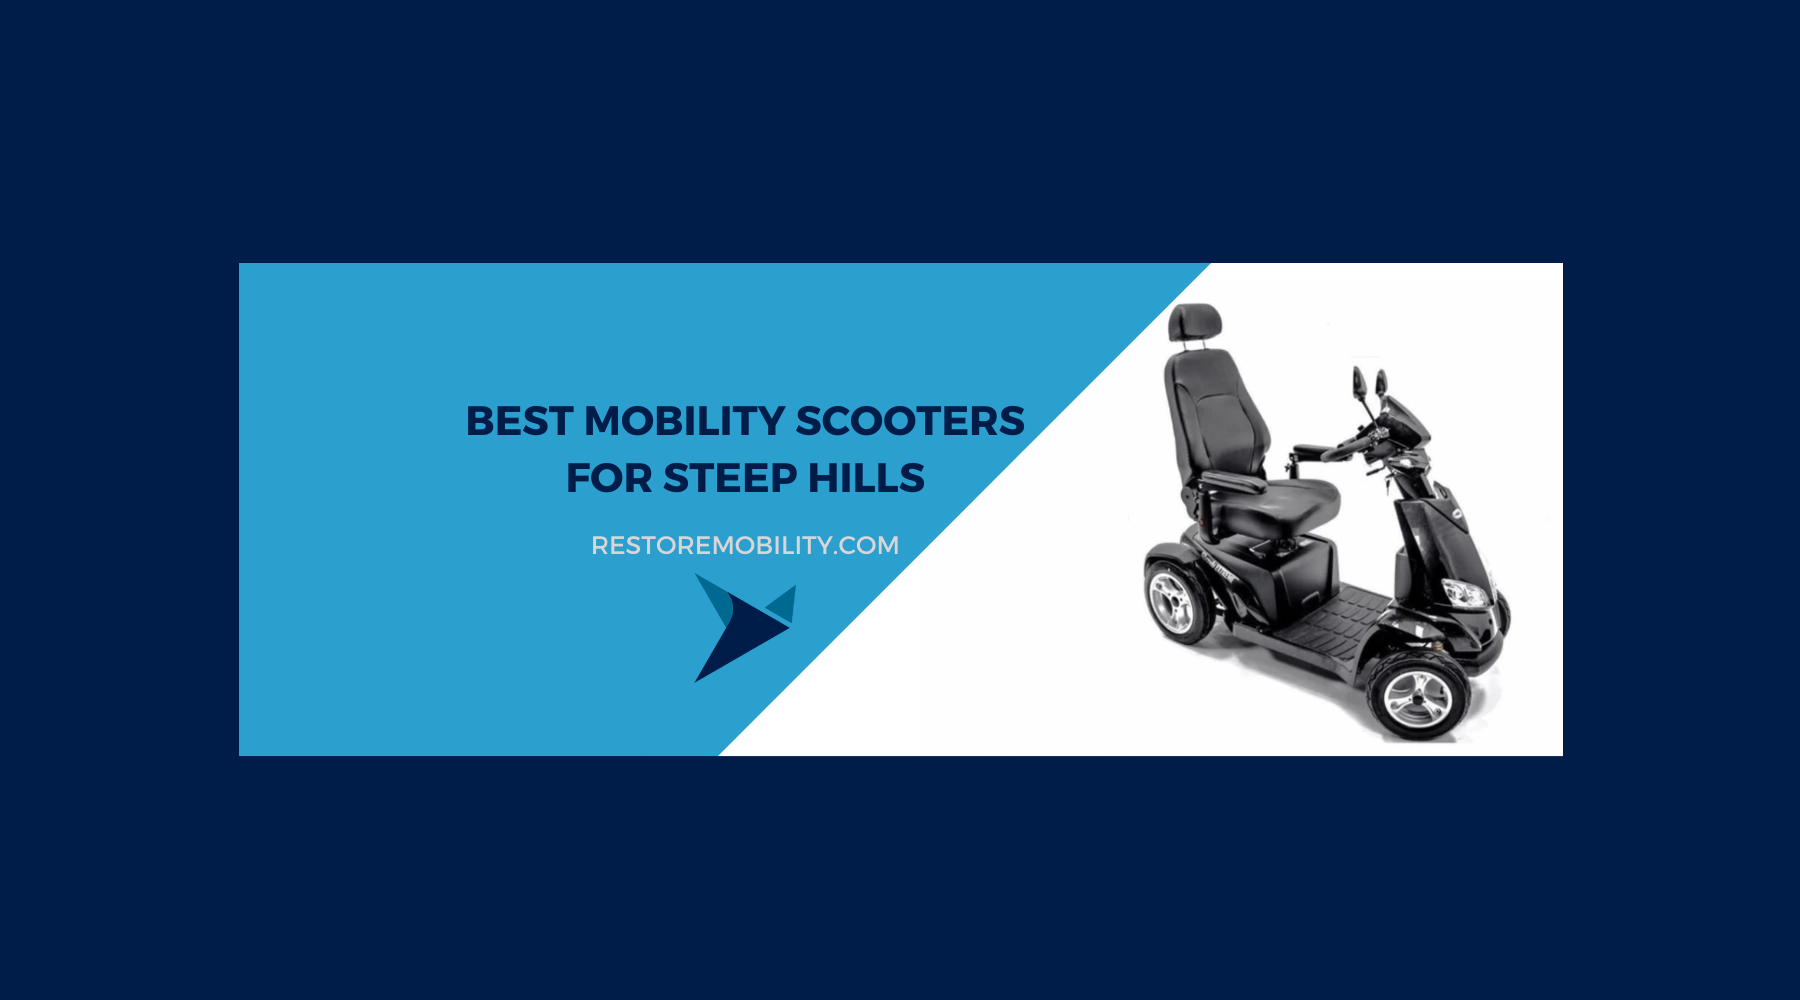 Best Mobility Scooter for Steep Hills: Top 6 Picks